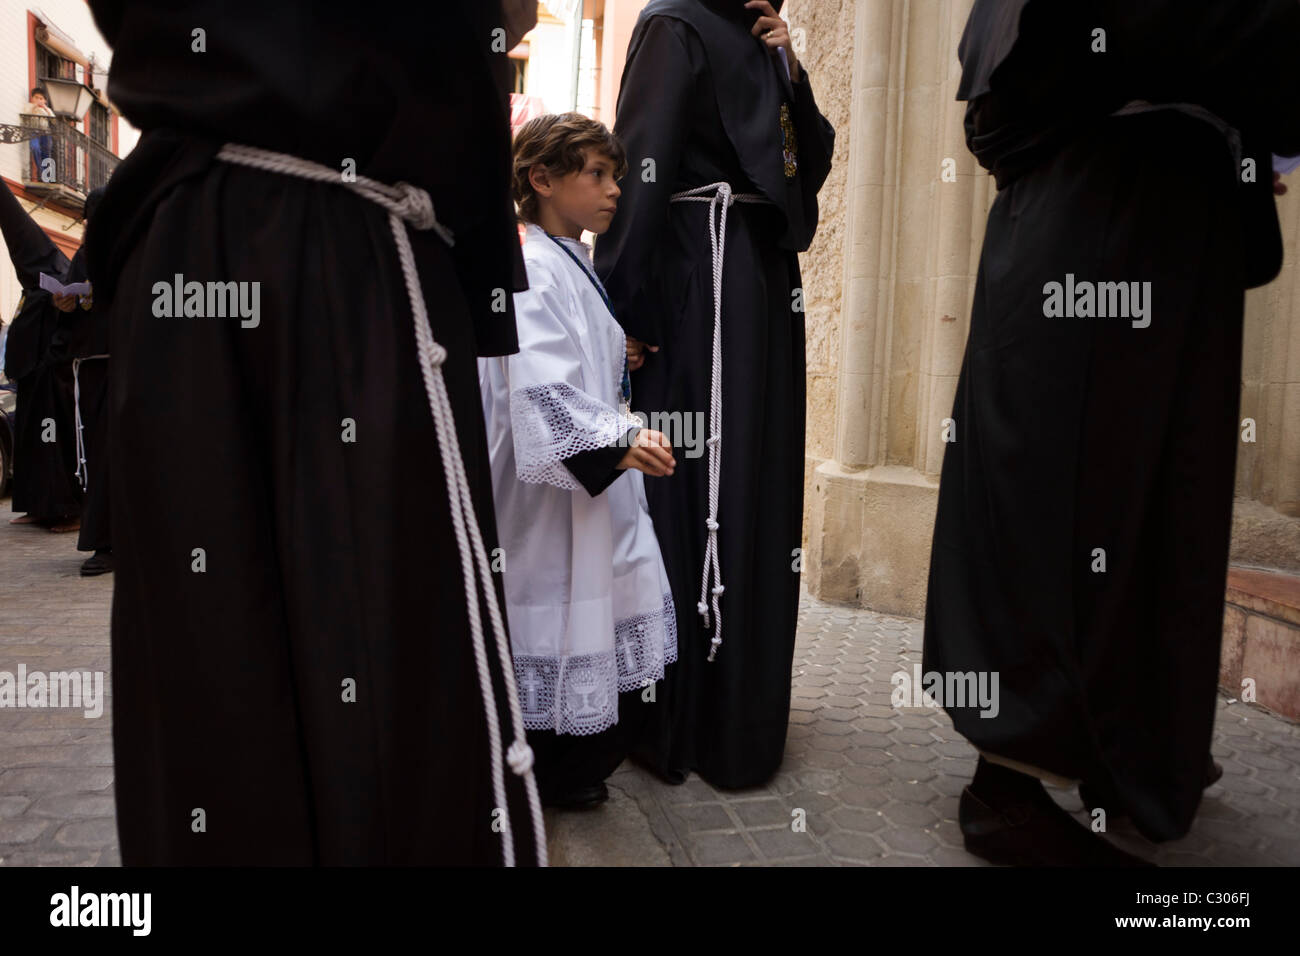 Altar boy and hooded penitents (Nazarenos) gather for Seville's annual Semana Santa Easter passion processions. Stock Photo